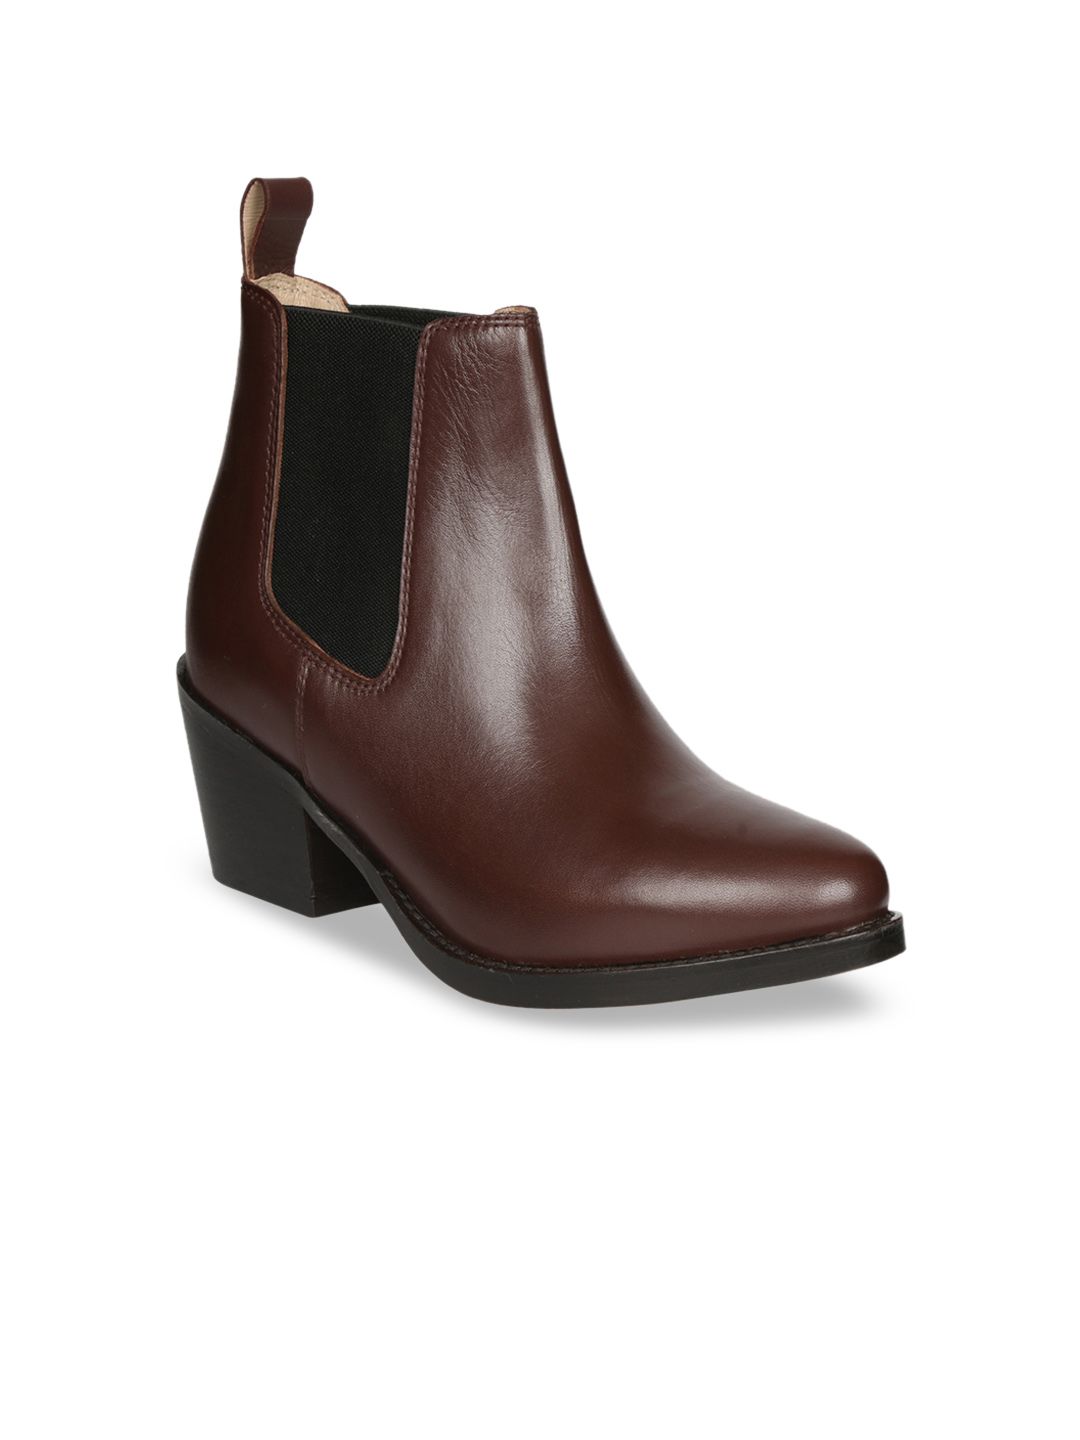 Saint G Women Brown Solid Leather Heeled Ankle Boots Price in India